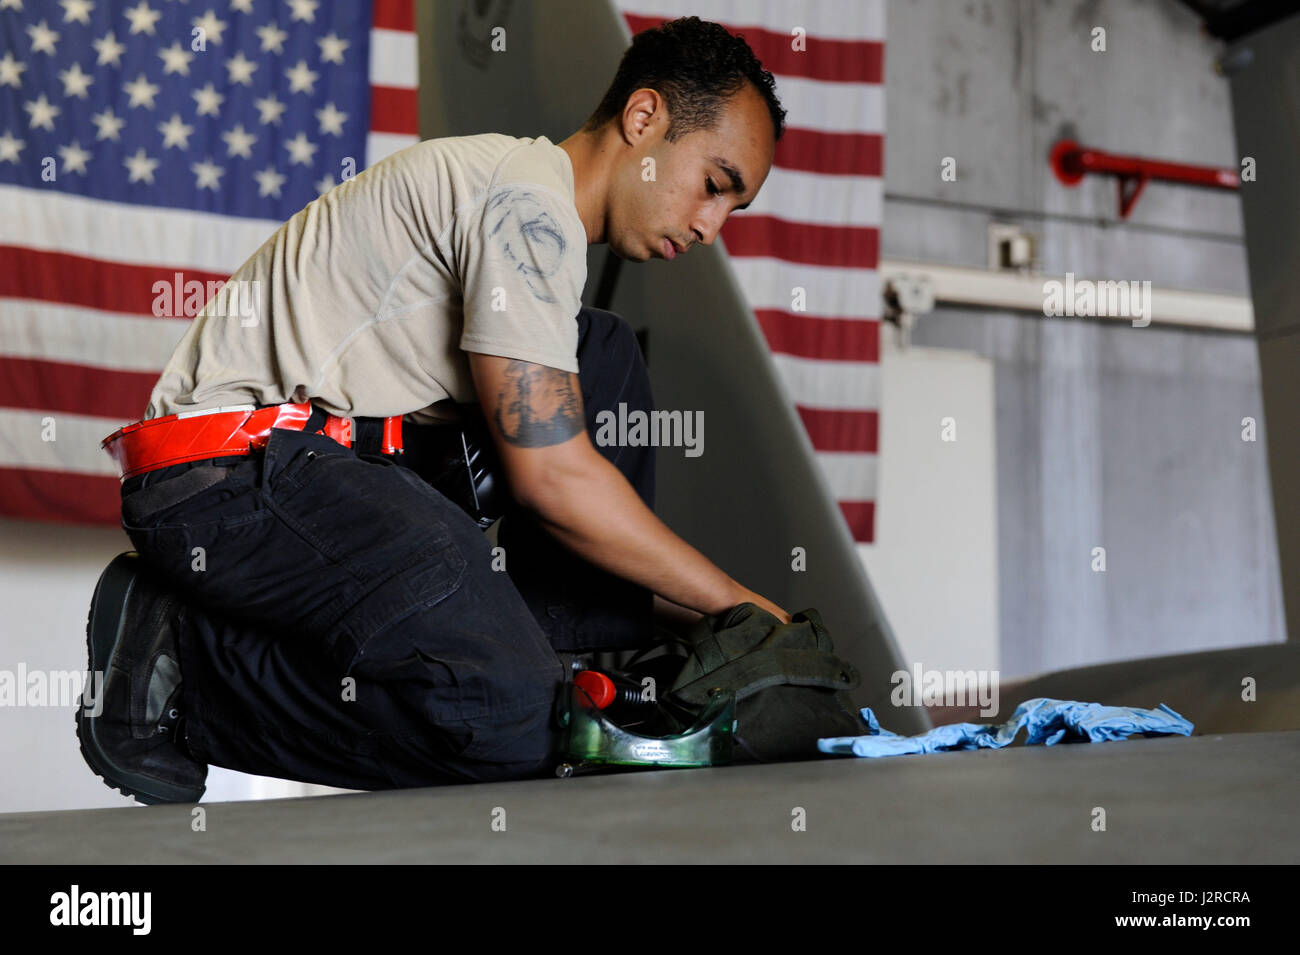 U.S. Air Force Senior Airman Devon Moore, 67th Aircraft Maintenance Unit crew chief, packs up maintenance gear April 24, 2017, at Kadena Air Base, Japan. Proper storage and transportation of tools is important for safety and security of the maintainers. (U.S. Air Force photo by Senior Airman Lynette M. Rolen) Stock Photo